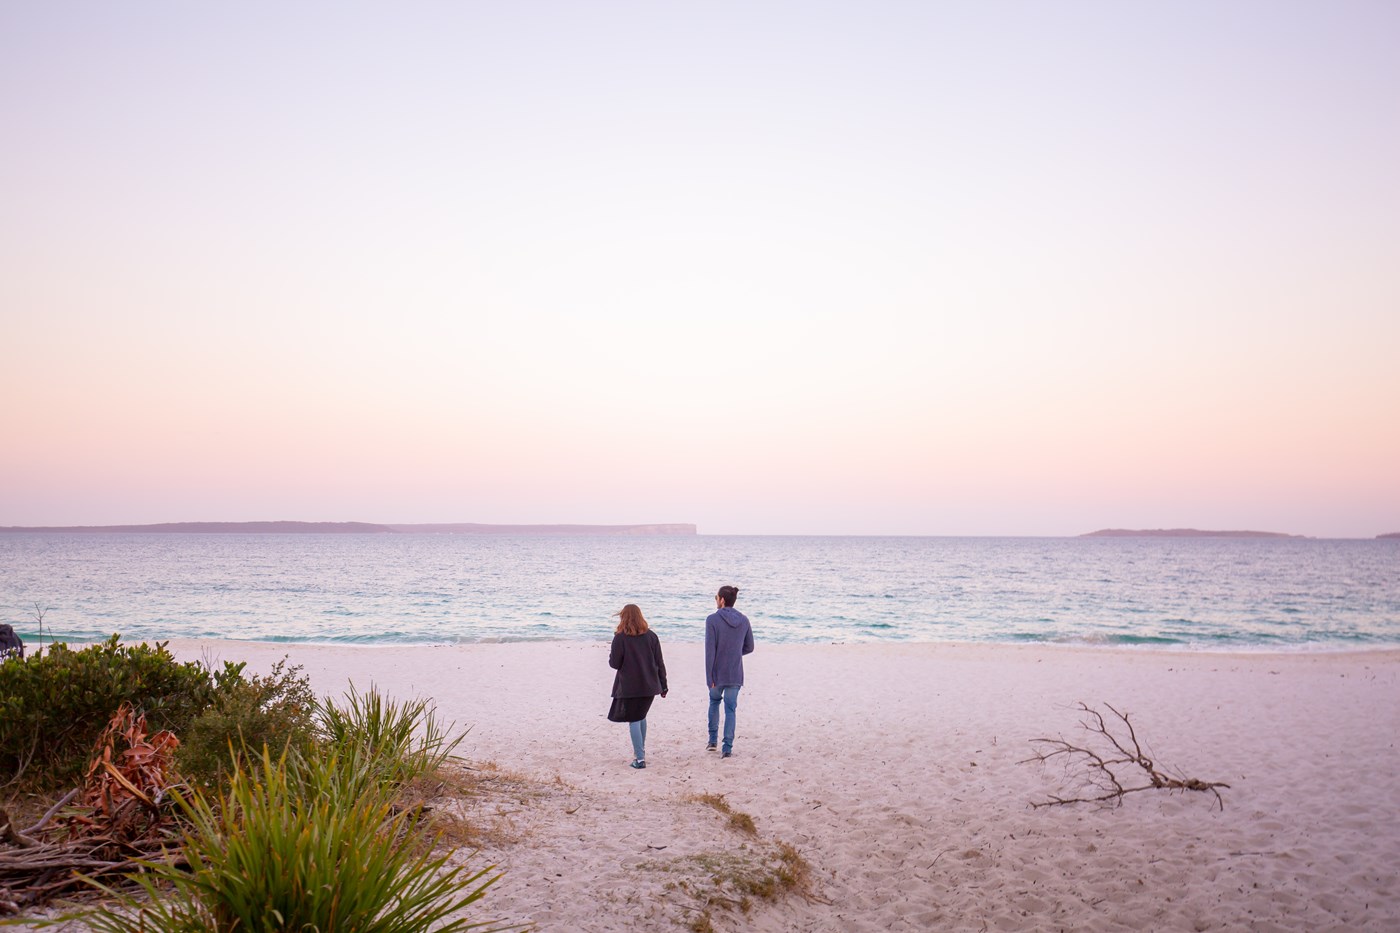 A man and woman walk on the beach towards the ocean during sunset at Jervis Bay NSW